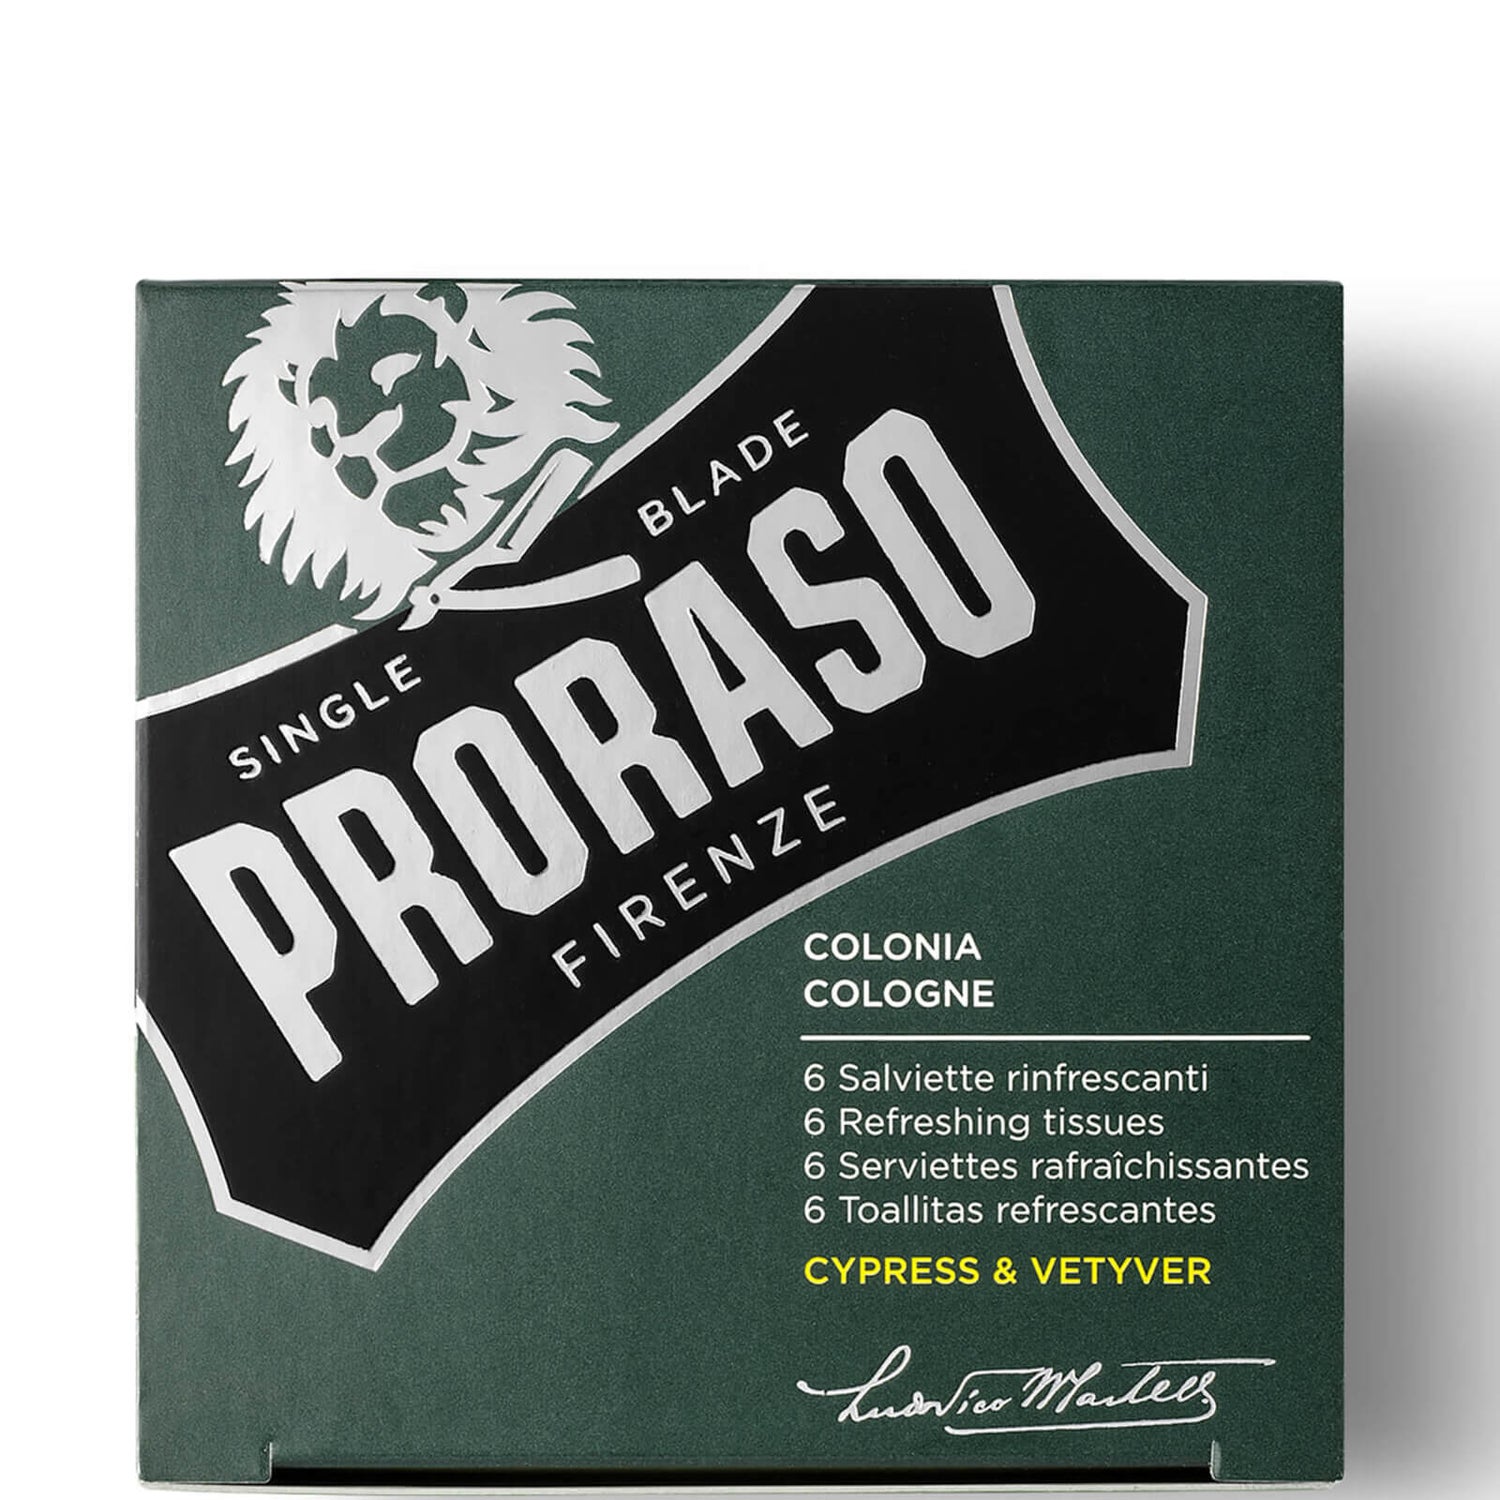 Proraso Refreshing Tissues - Cypress and Vetyver (Pack of 6)